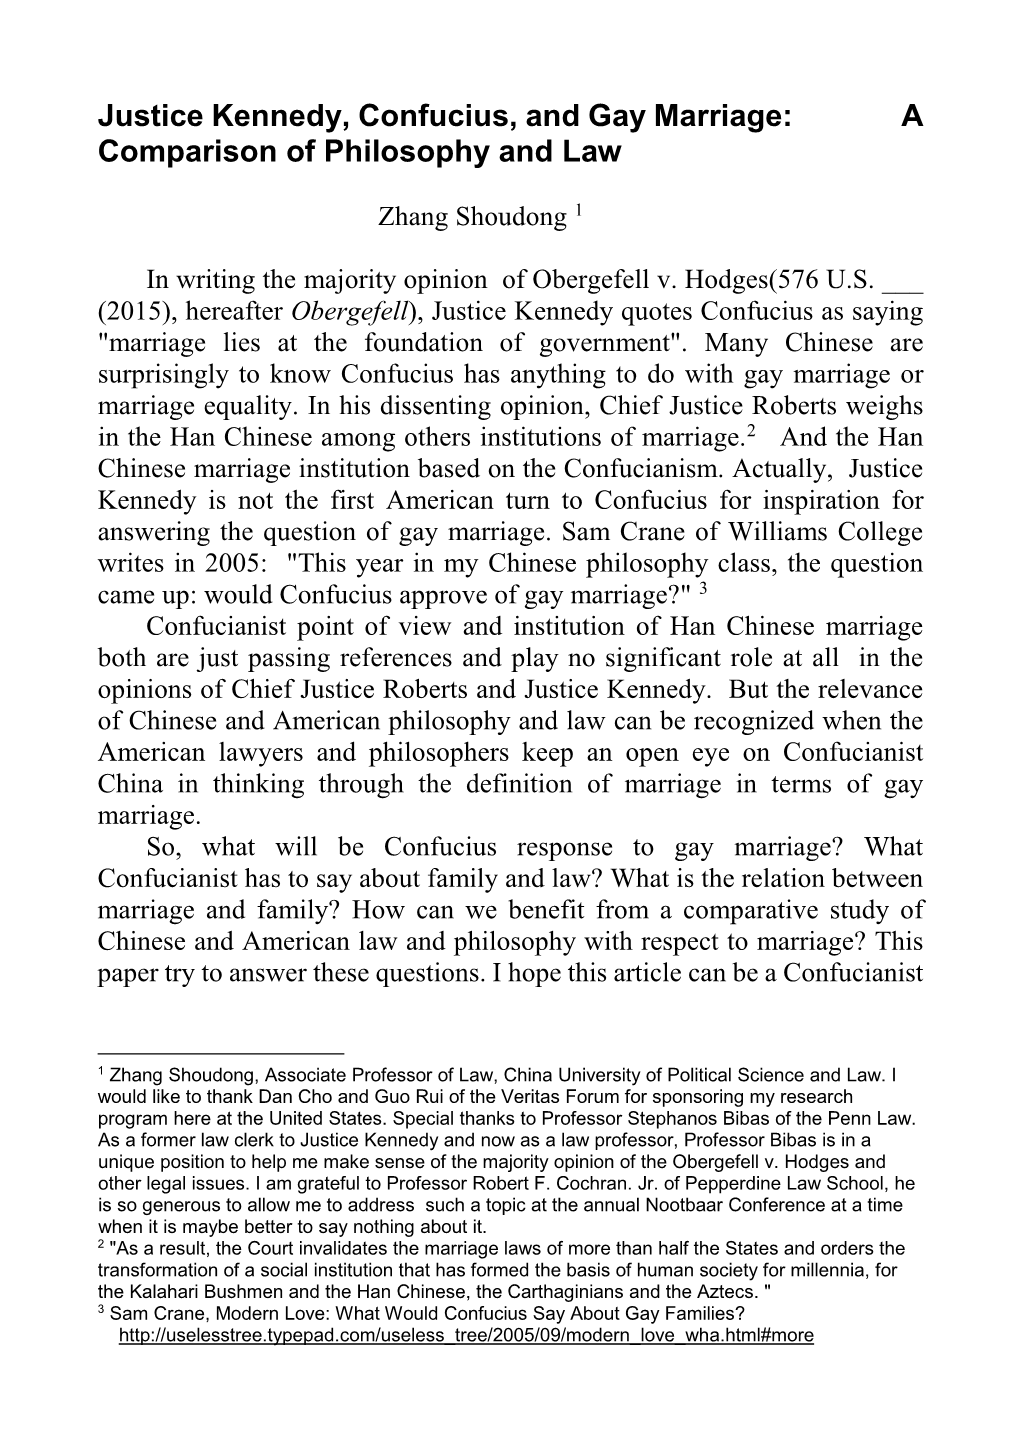 Justice Kennedy, Confucius, and Gay Marriage: a Comparison of Philosophy and Law